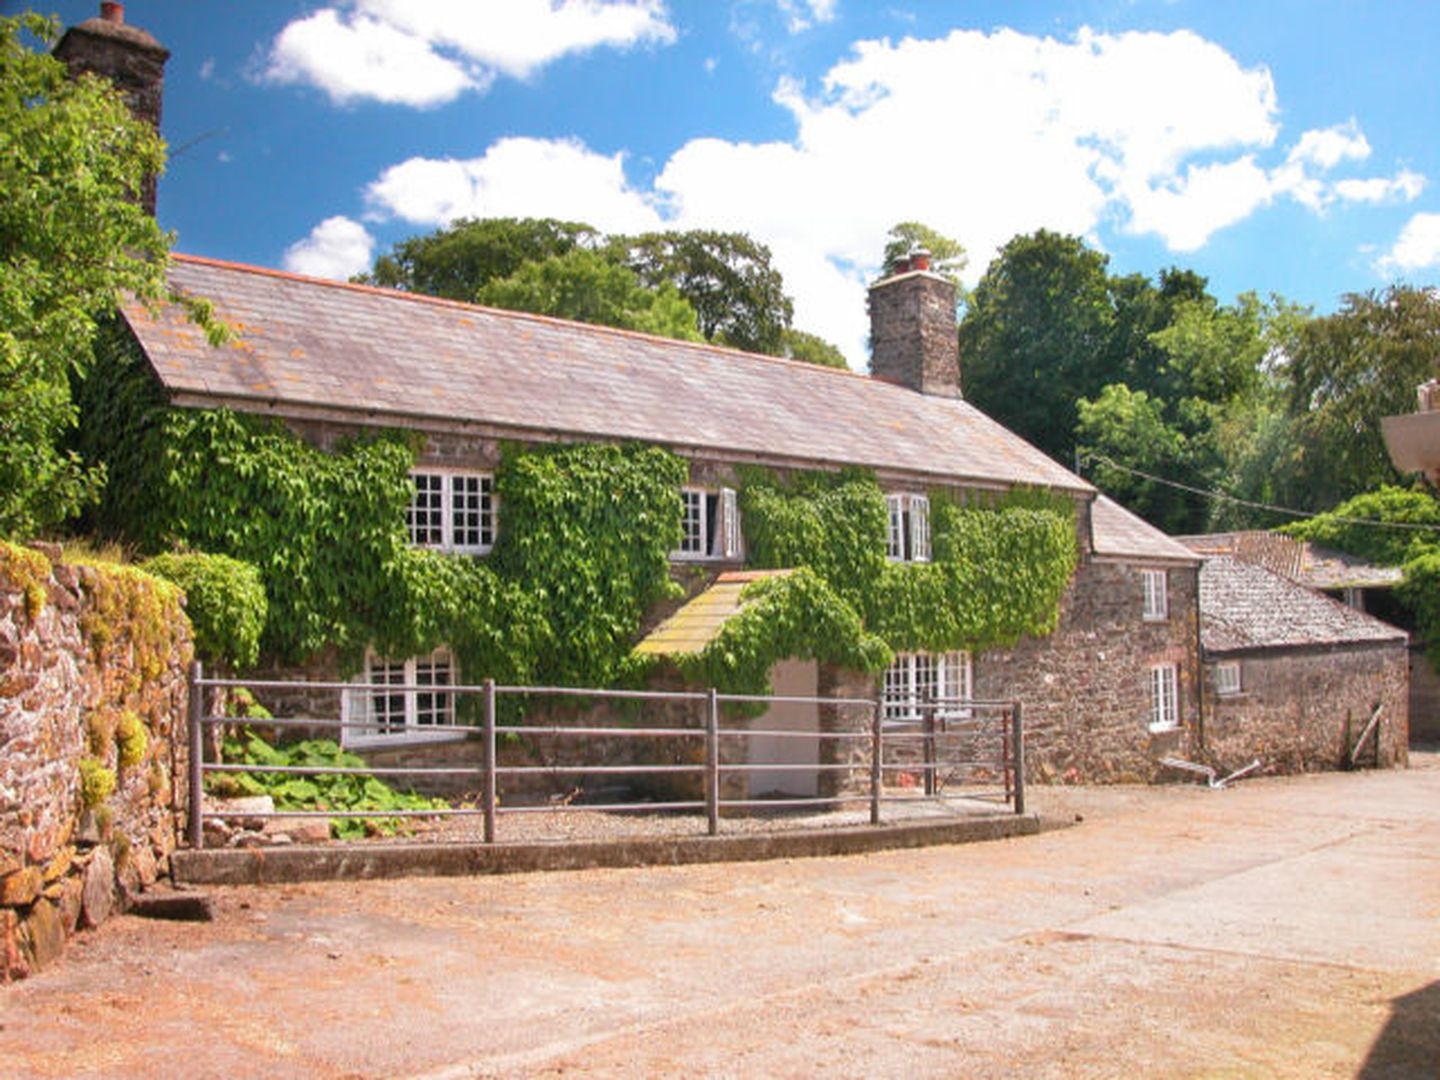 Maristow Barton Devon Devon England Cottages For Couples Find Holiday Cottages For 